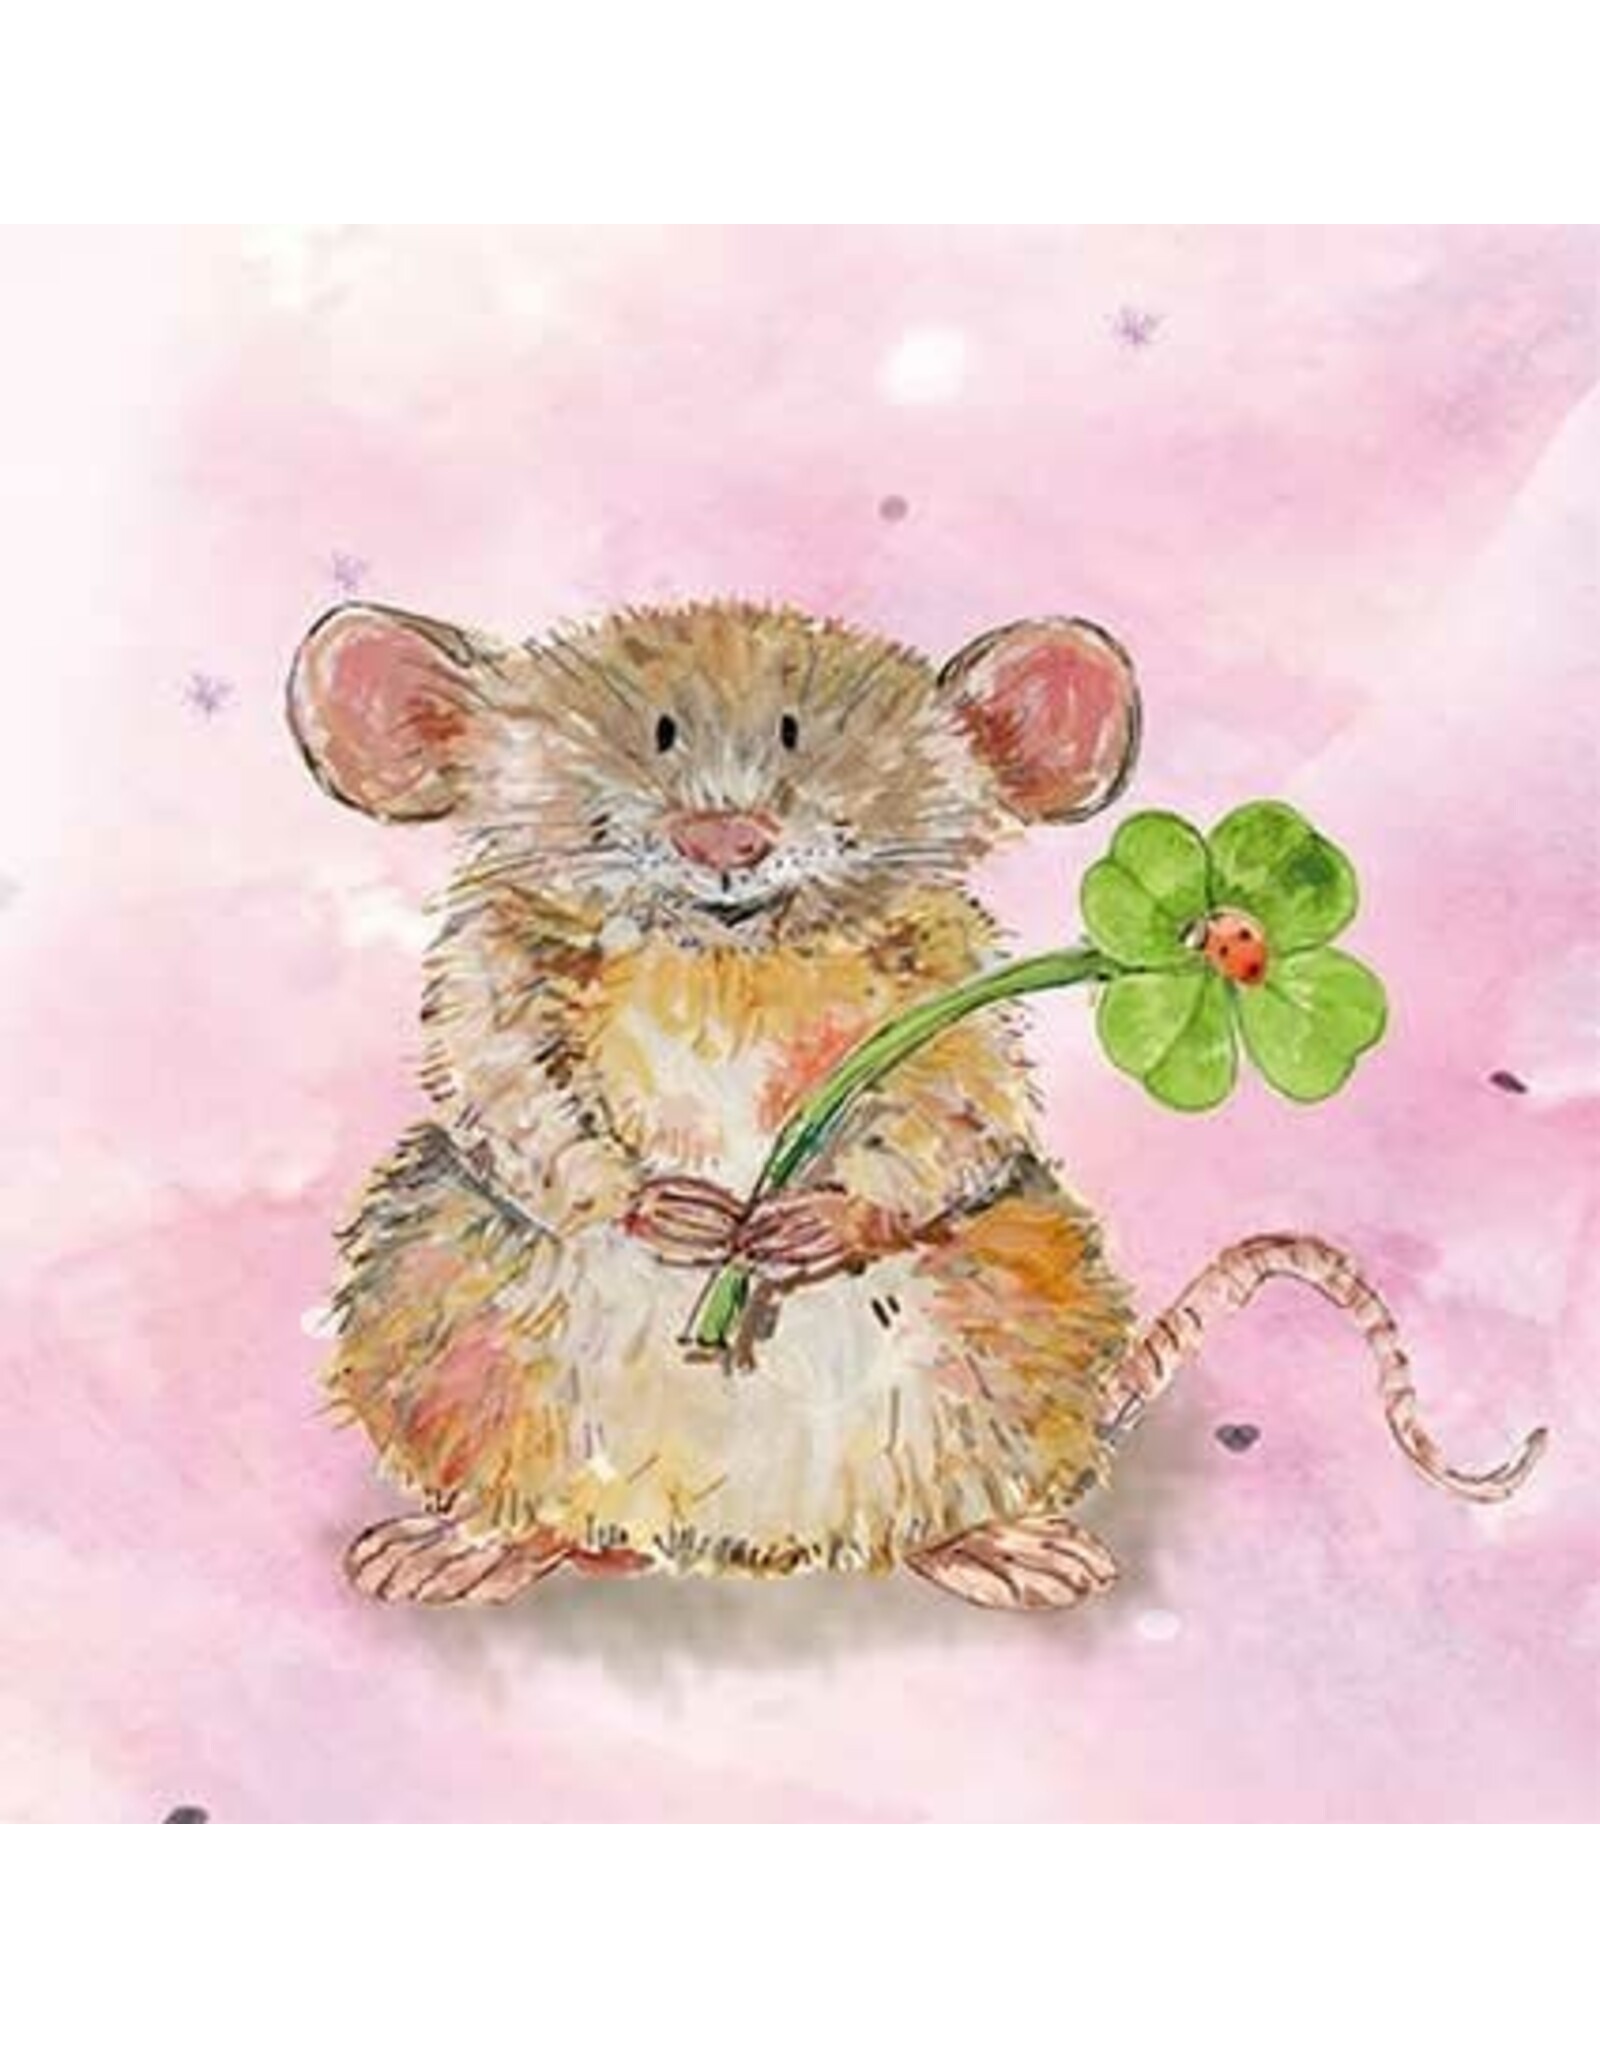 Animal Friends Animal Friends Card "Mouse"